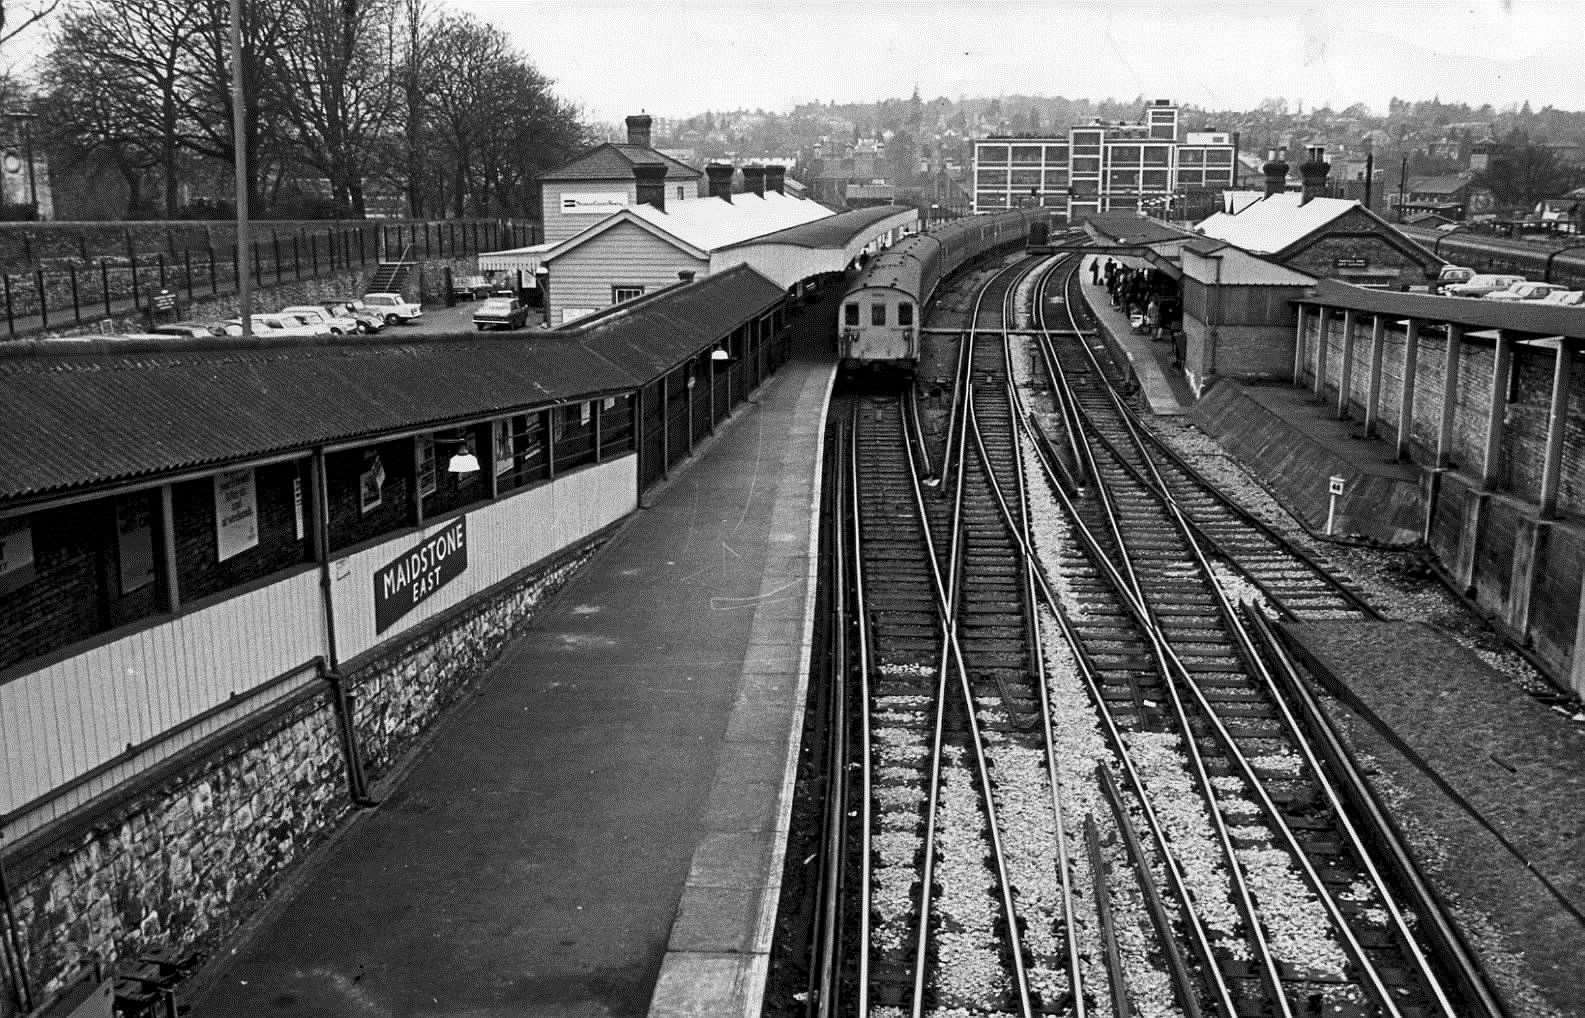 Maidstone East Railway Station in April 1969